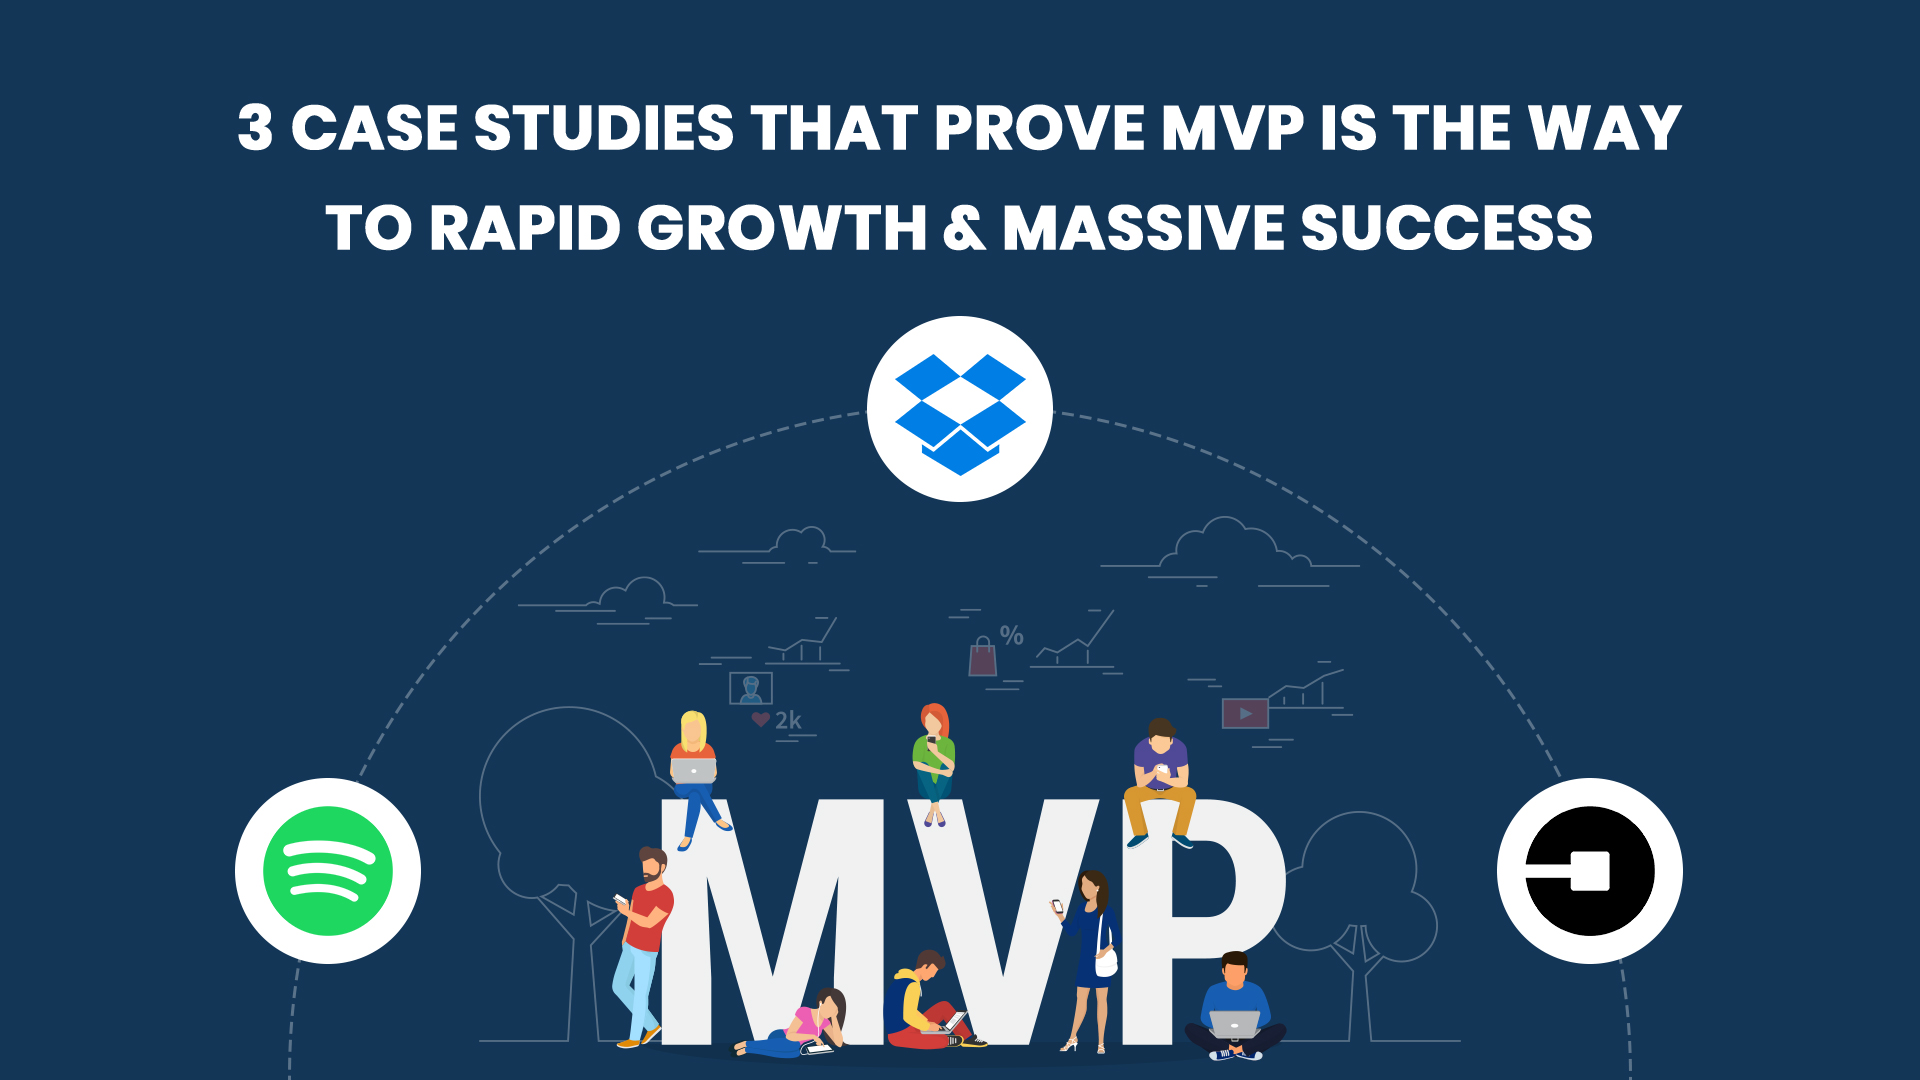 3 Case Studies That Prove MVP is the Way to Rapid Growth & Massive Success